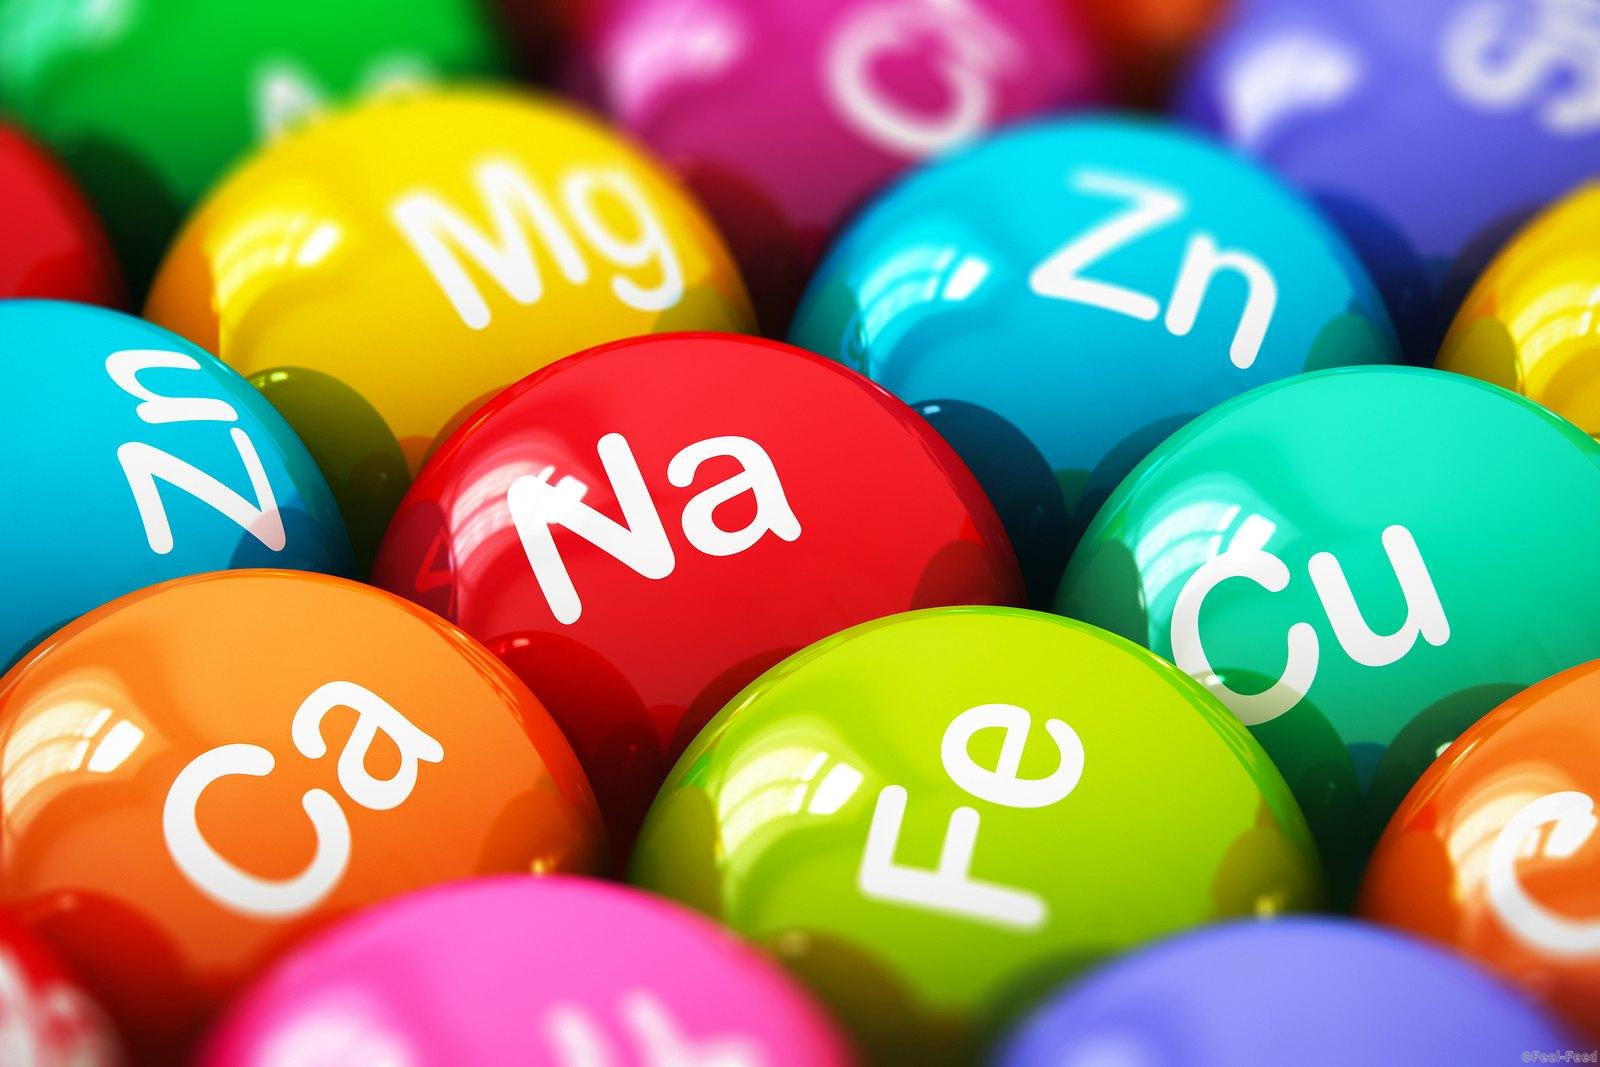 Macro view of color balls pills or tablets with minerals and microelements names with selective focus effect